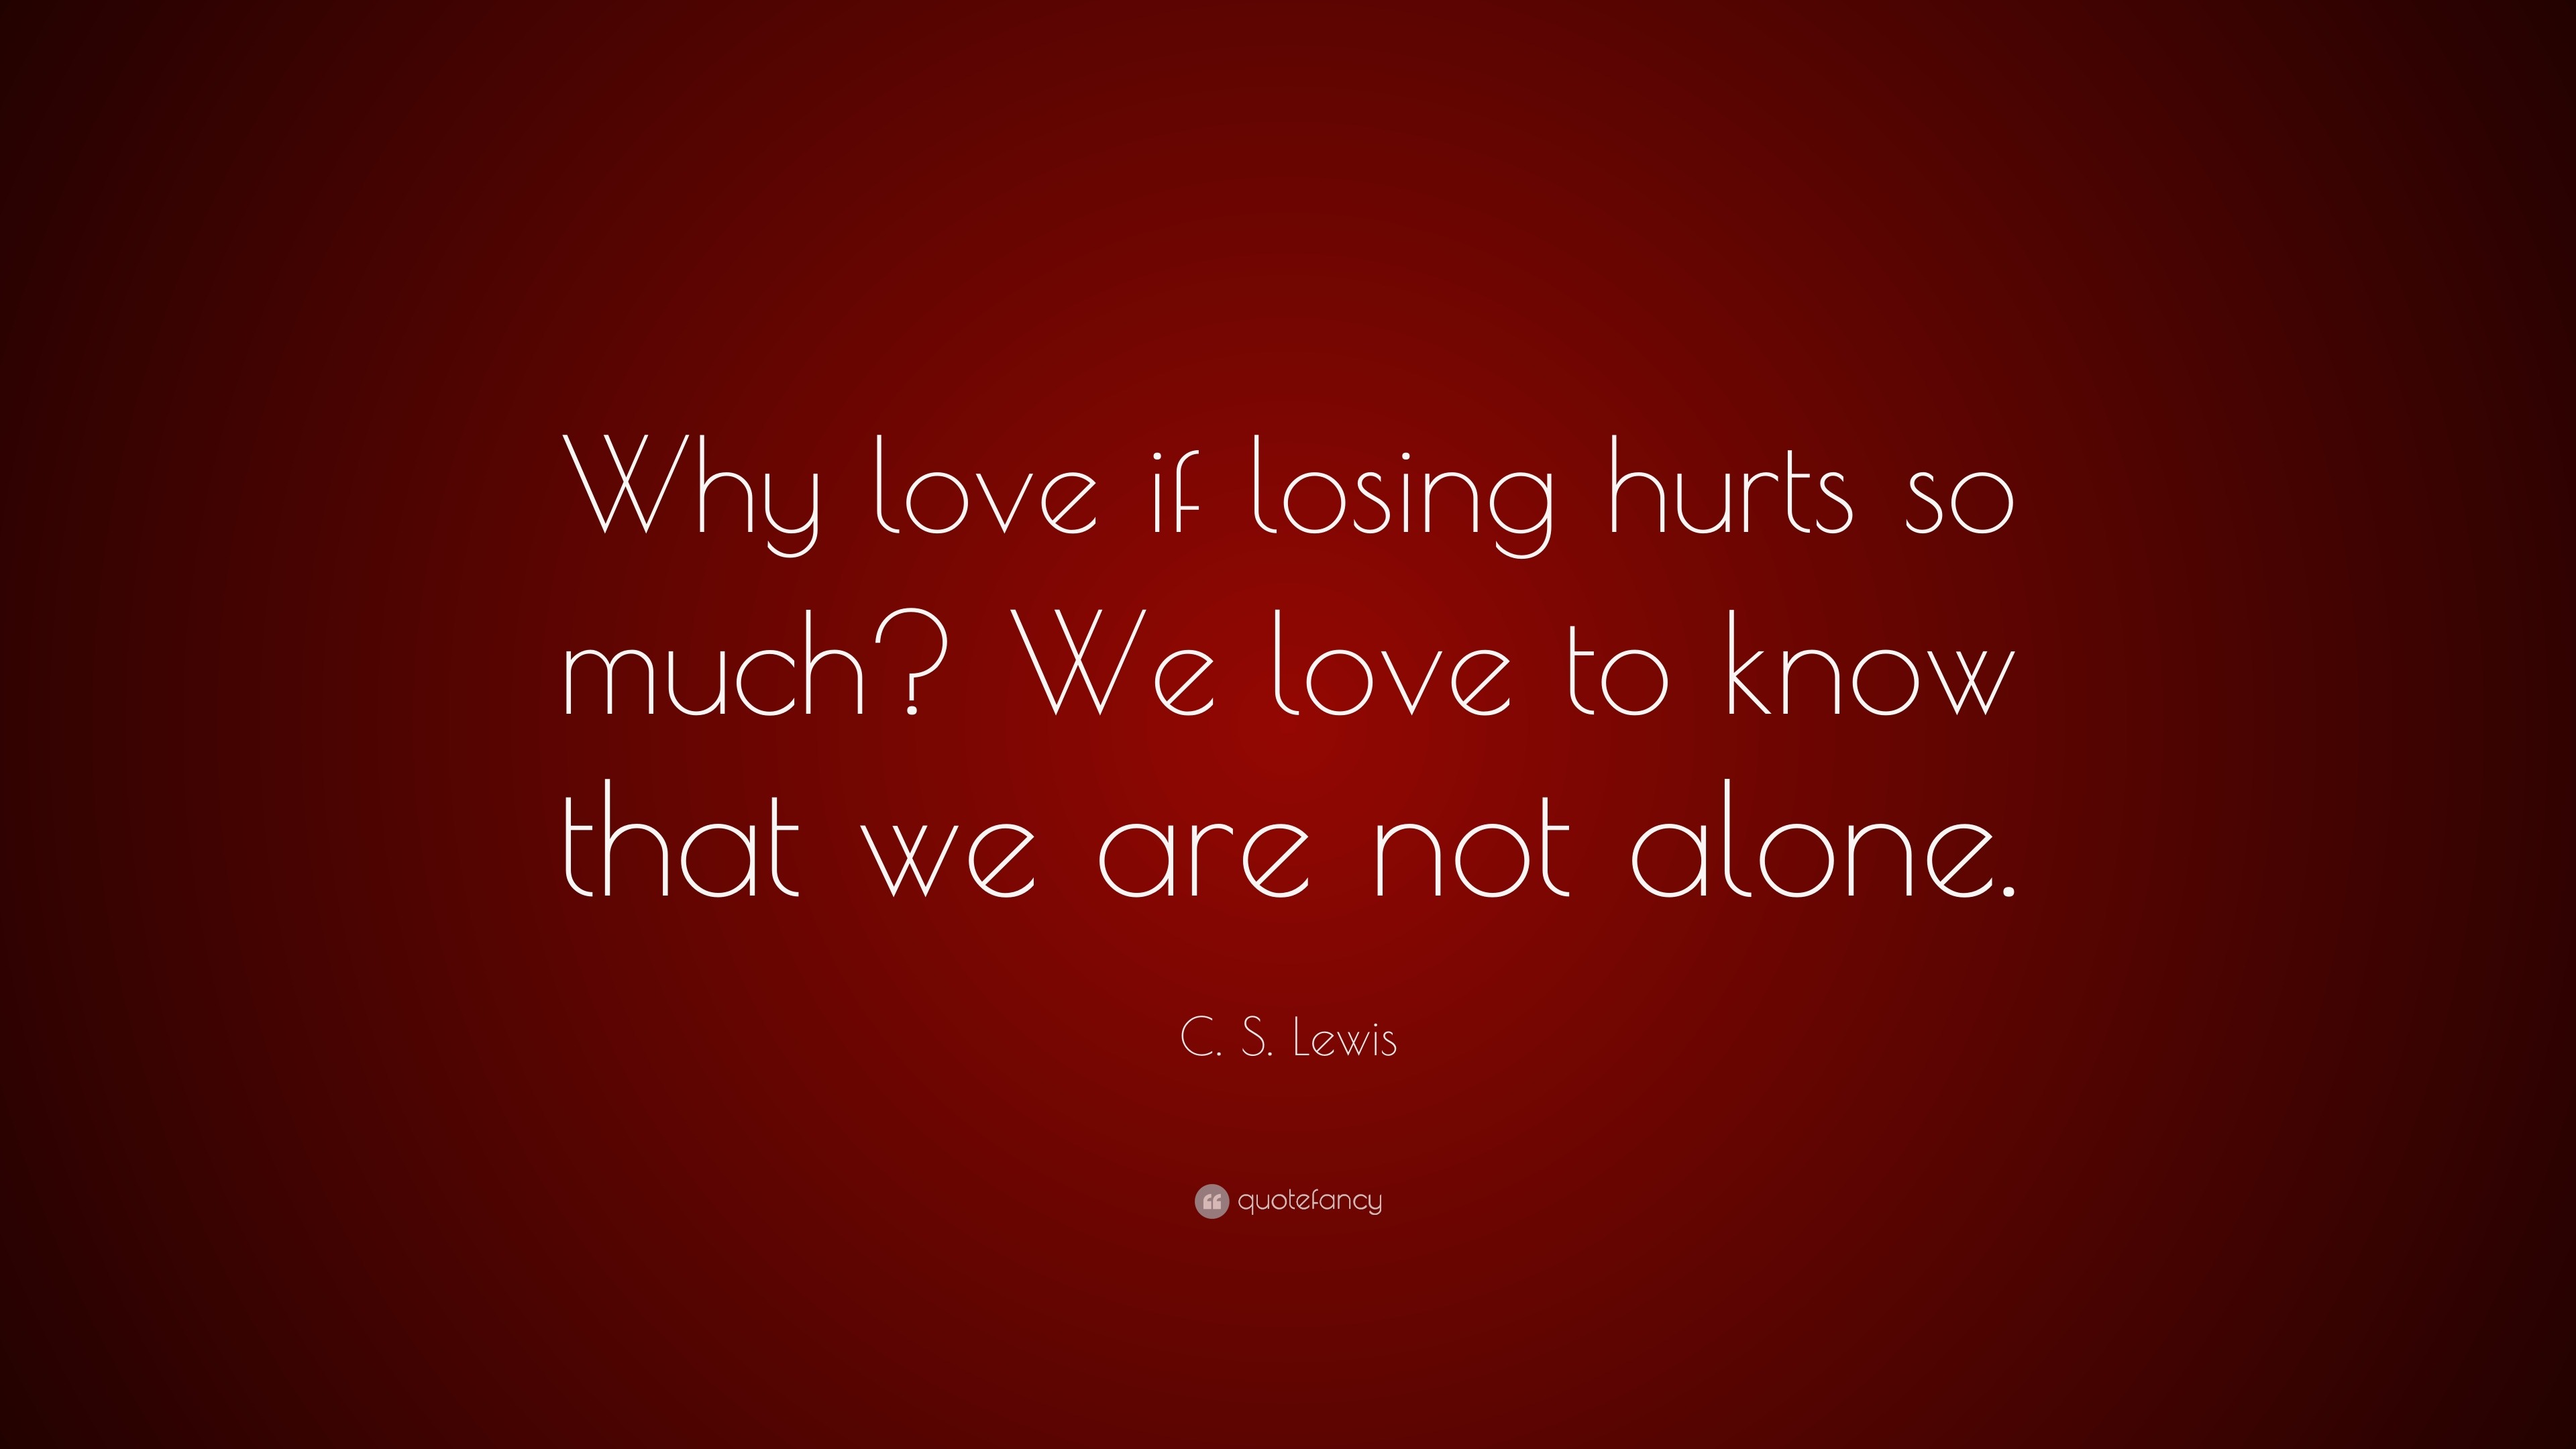 C S Lewis Quote “Why love if losing hurts so much We love to